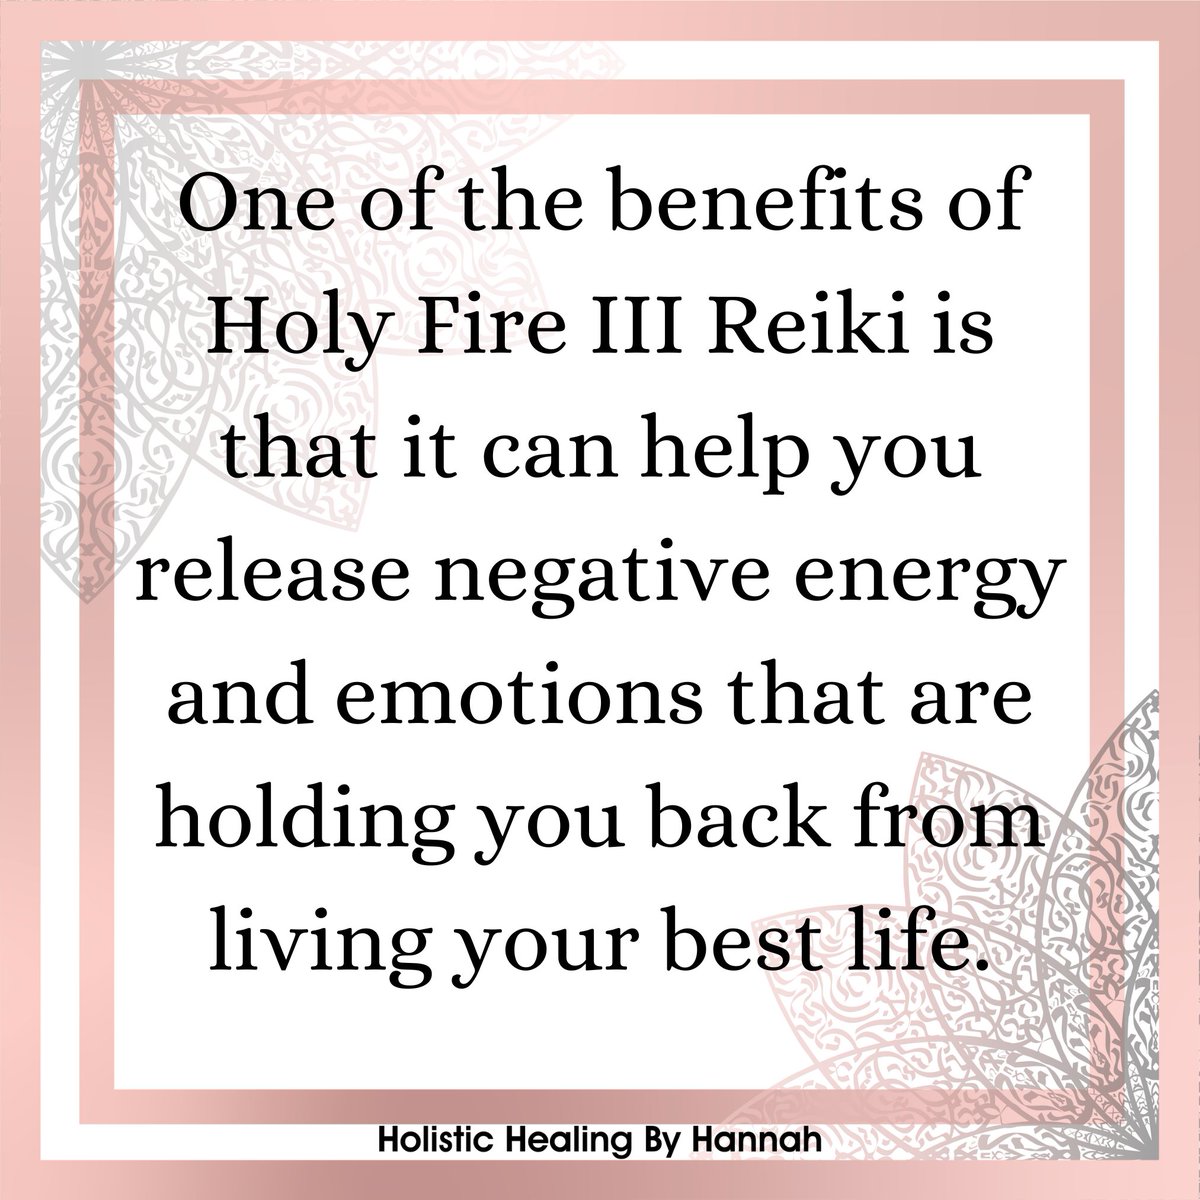 One of the benefits of Holy Fire III Reiki is that it can help you release negative energy and emotions that are holding you back from living your best life. 

Level 1 Class tomorrow! 

#SpiritualGuidanceSystem #SelfReiki #InternalGuidanceSystem #InnerKnowing